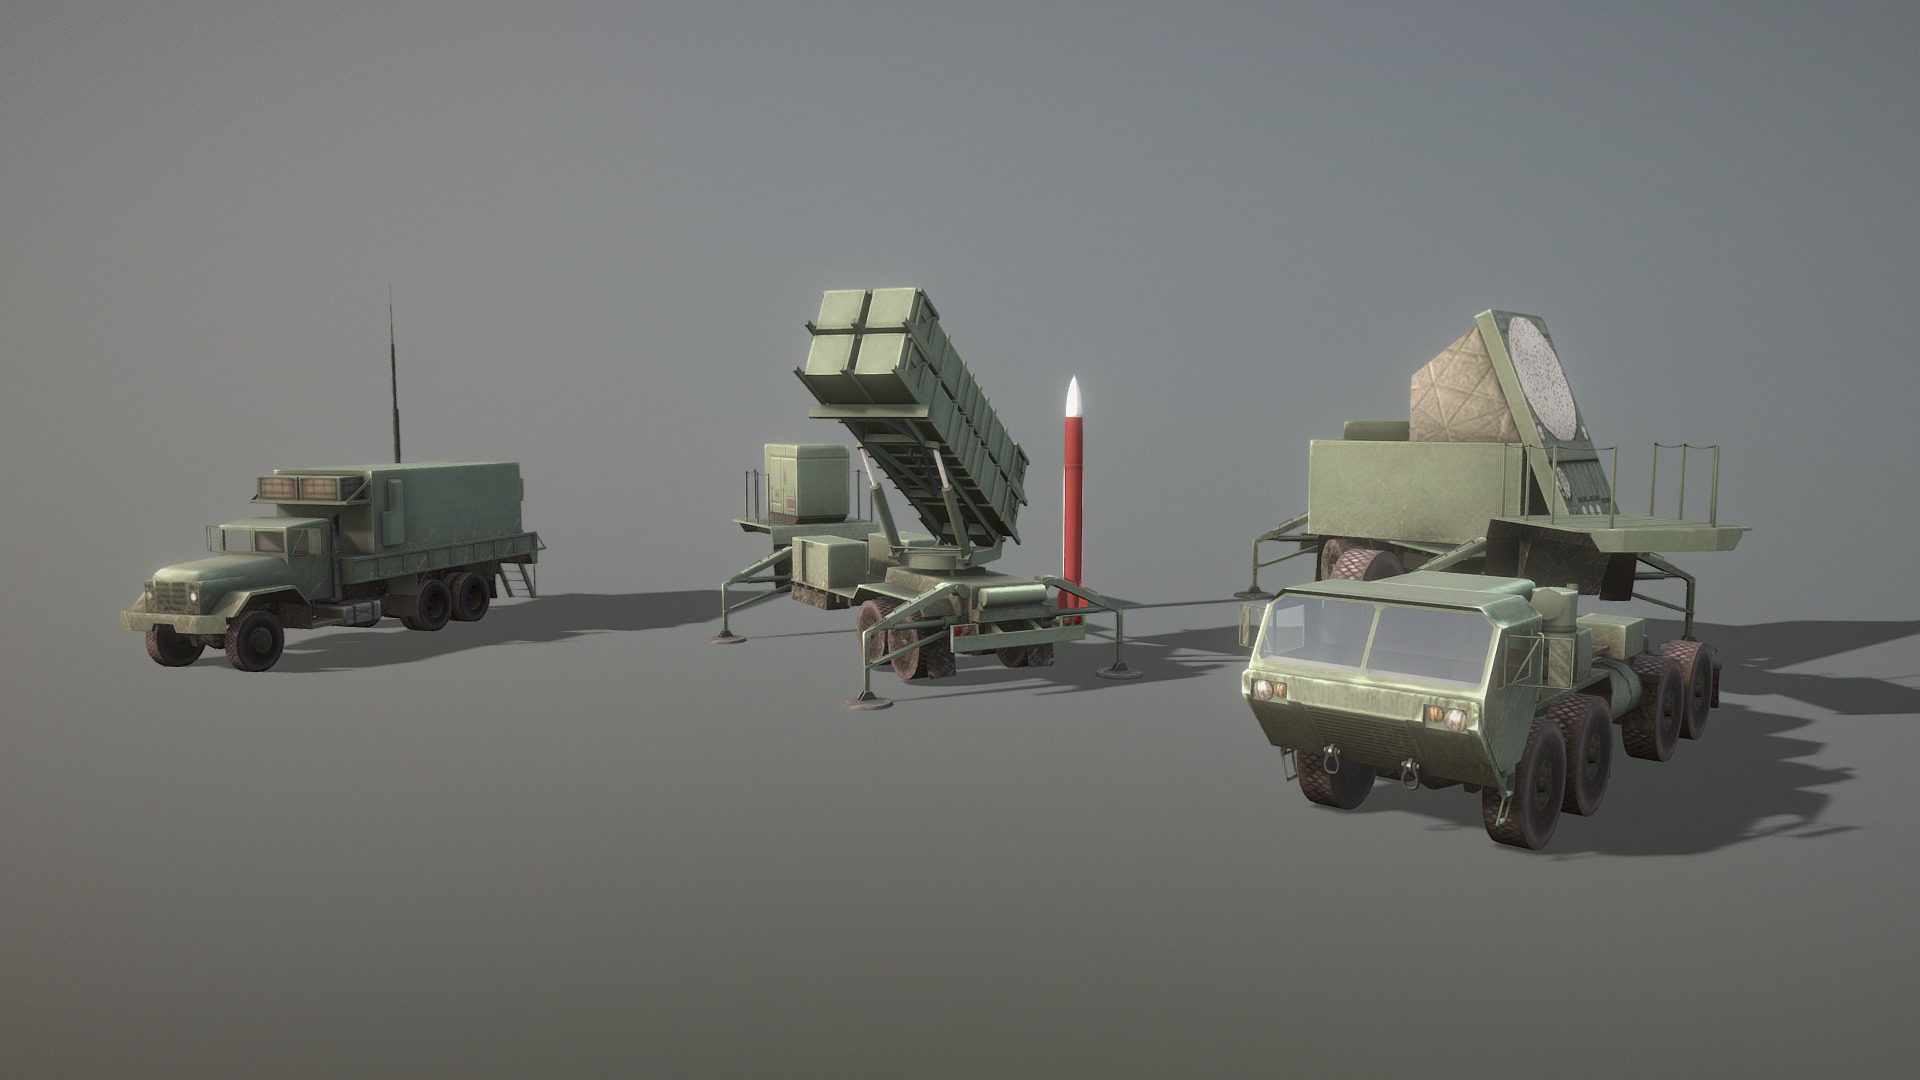 3D model MIM-104 Patriot  surface-to-air missile - This is a 3D model of the MIM-104 Patriot  surface-to-air missile. The 3D model is about a group of military vehicles.